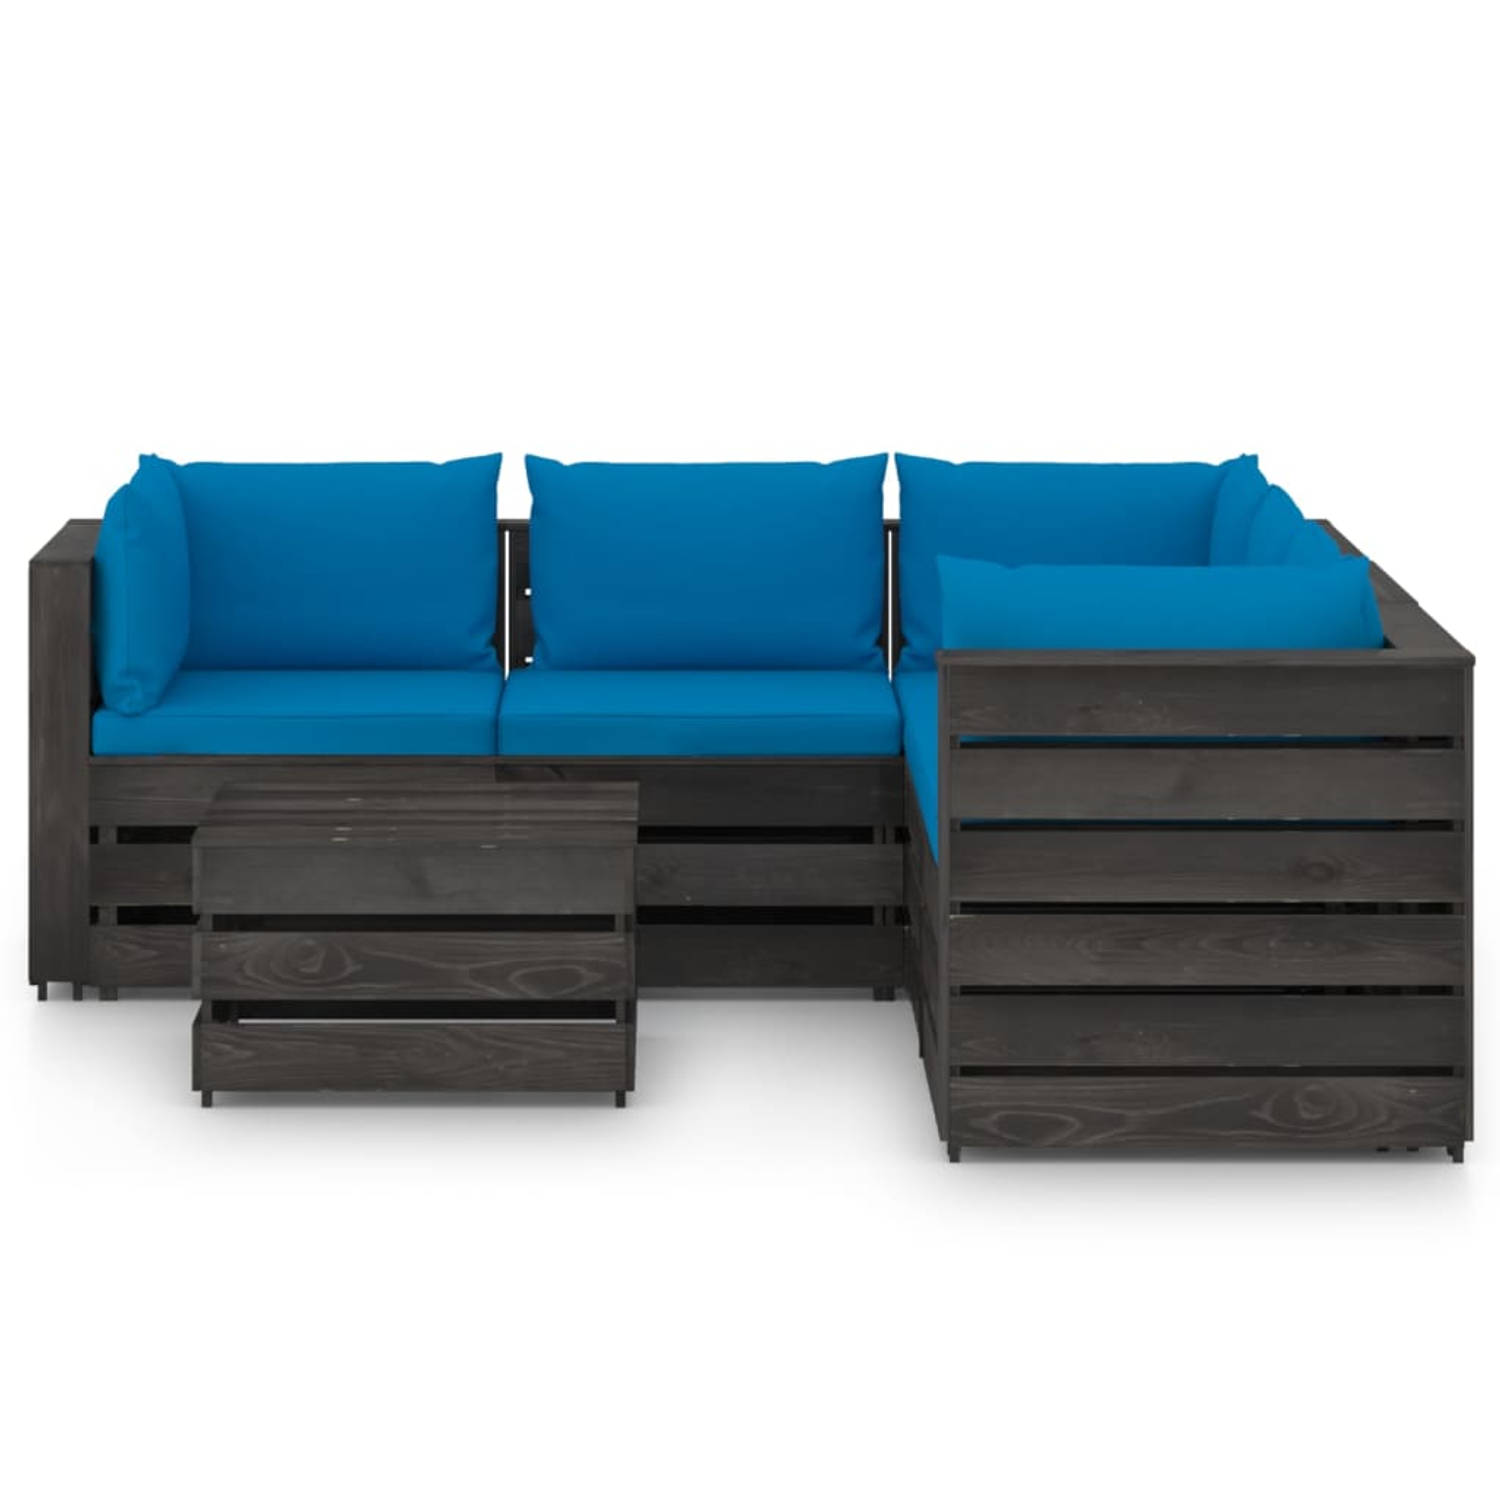 The Living Store Pallet Loungeset - Grenenhout - 69 x 70 x 66 cm - Lichtblauwe kussens